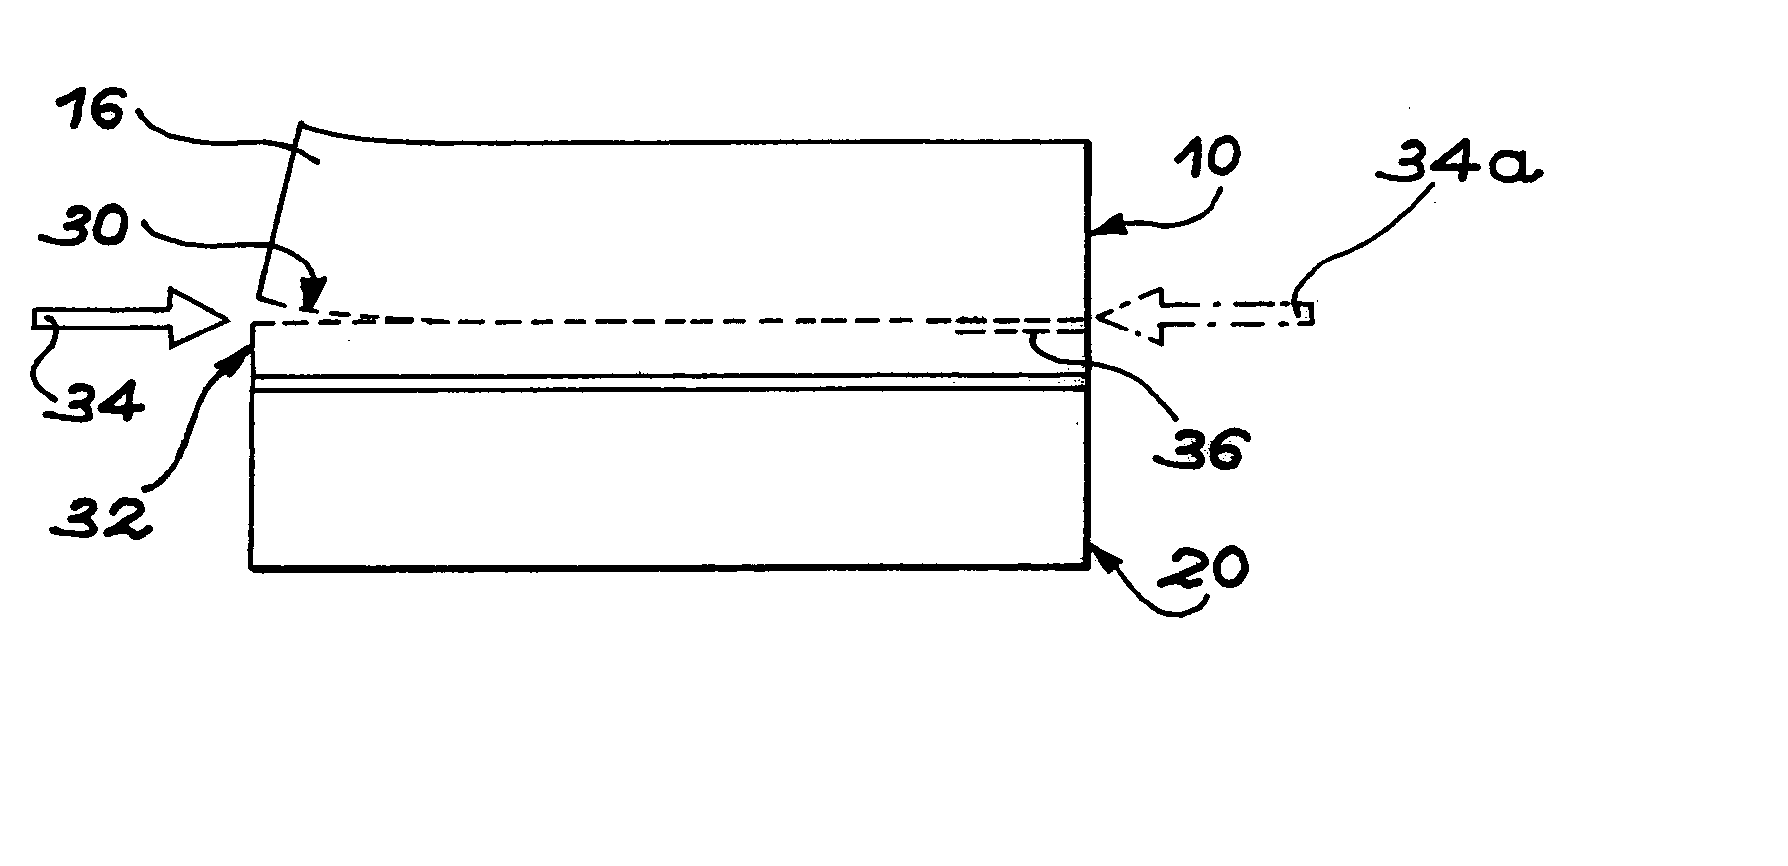 Method for cutting a block of material and forming a thin film